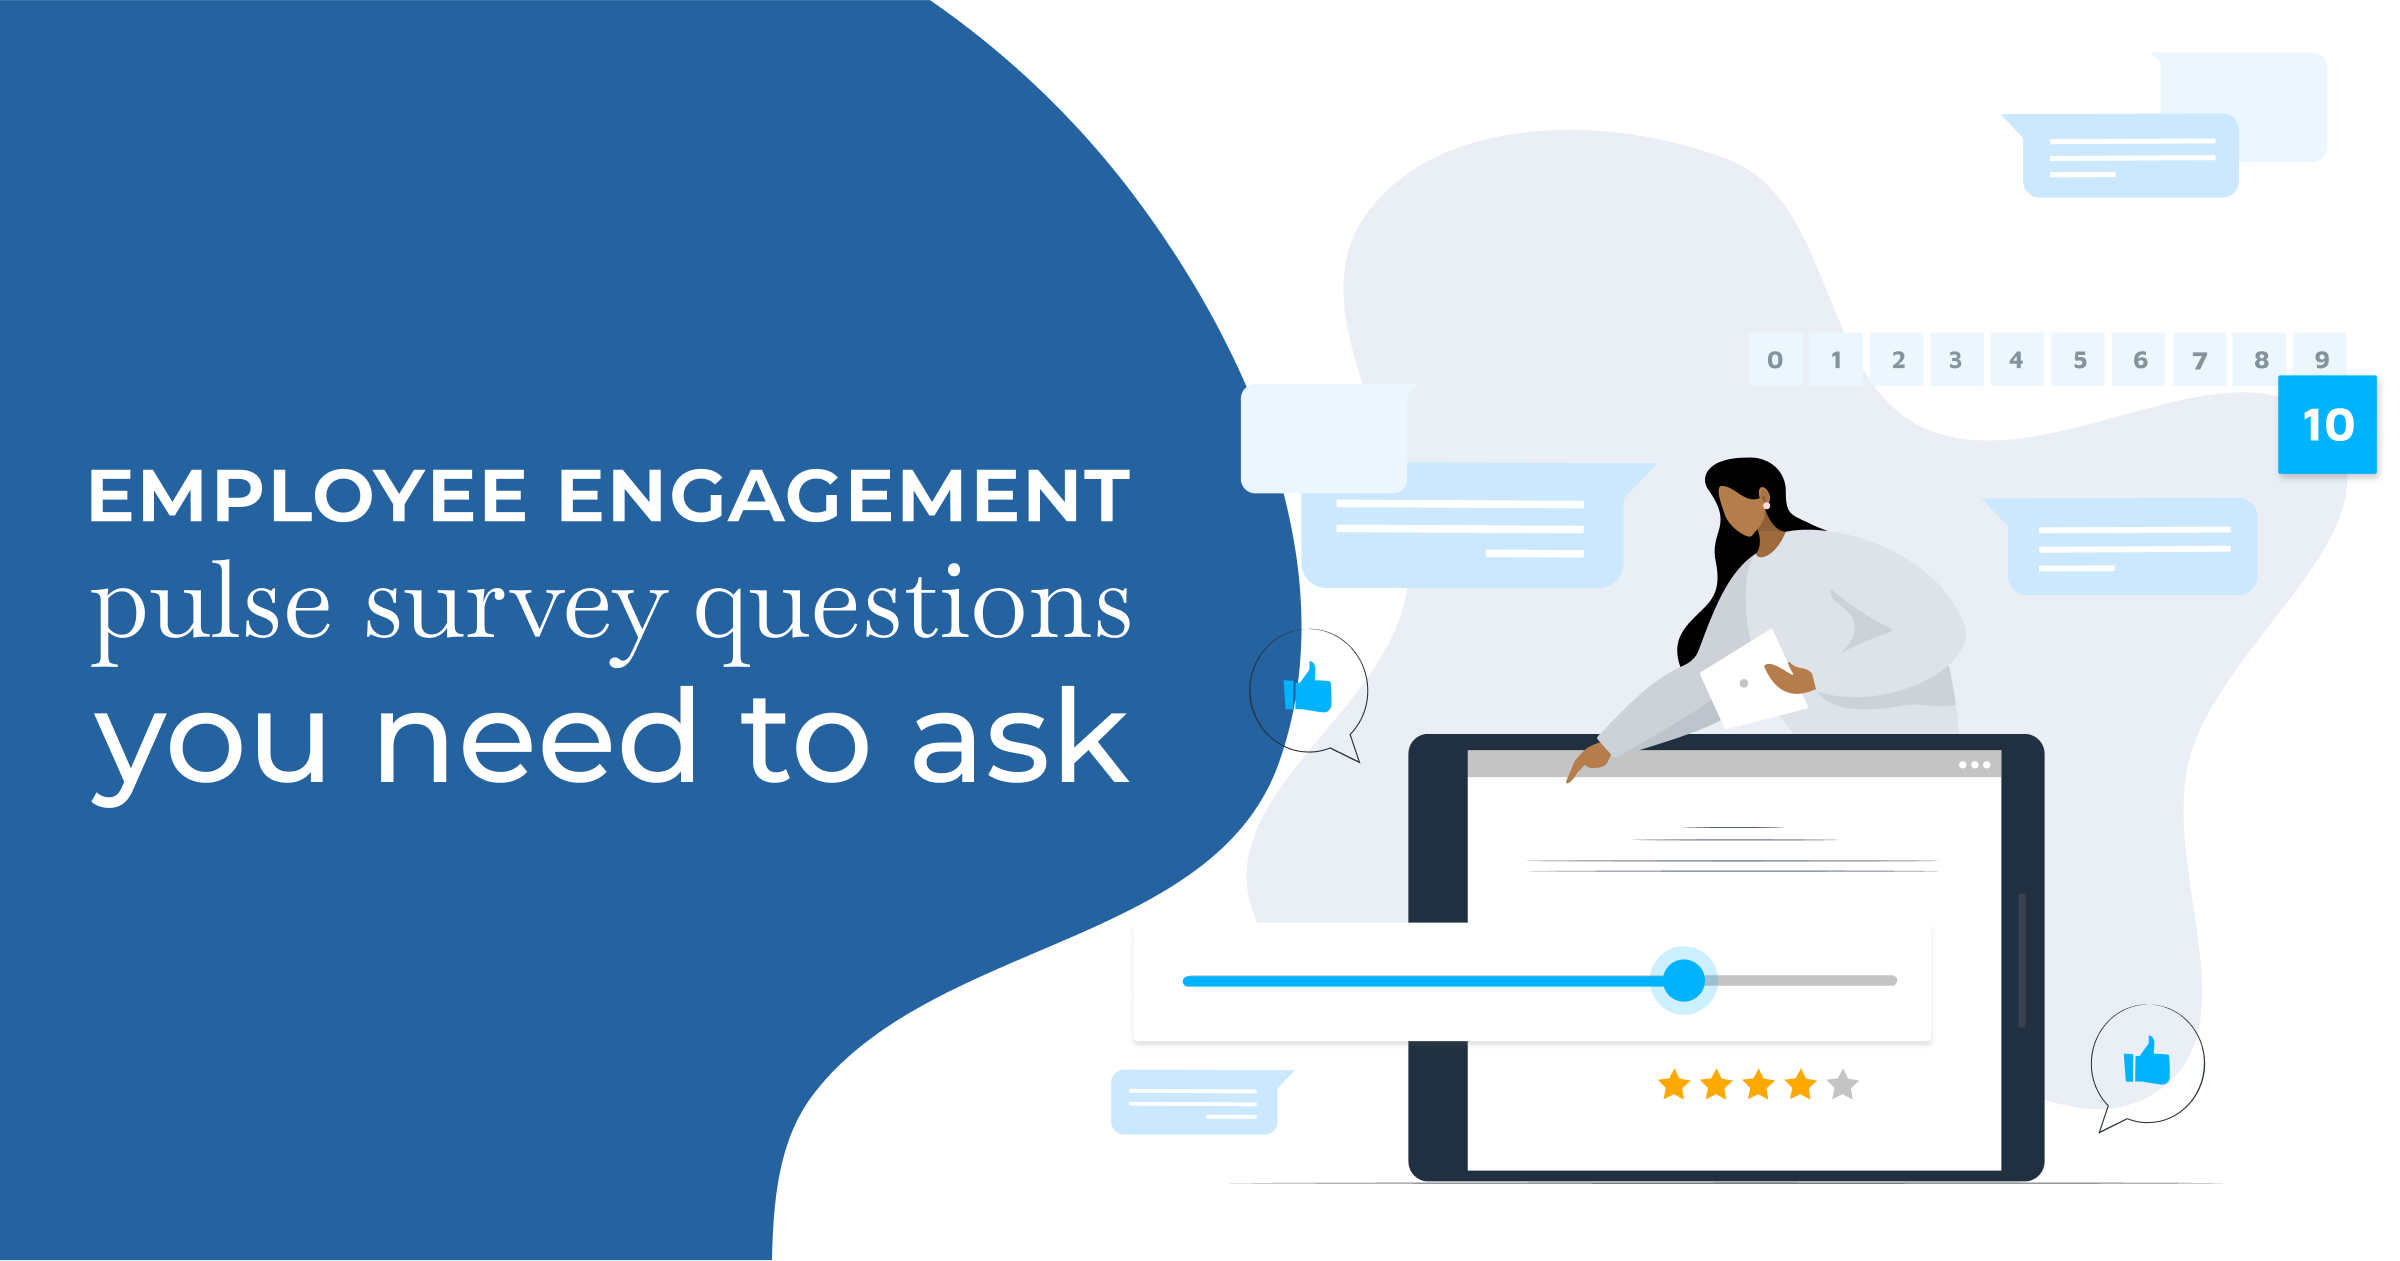 Employee Engagement Pulse Survey Questions You Need to Ask